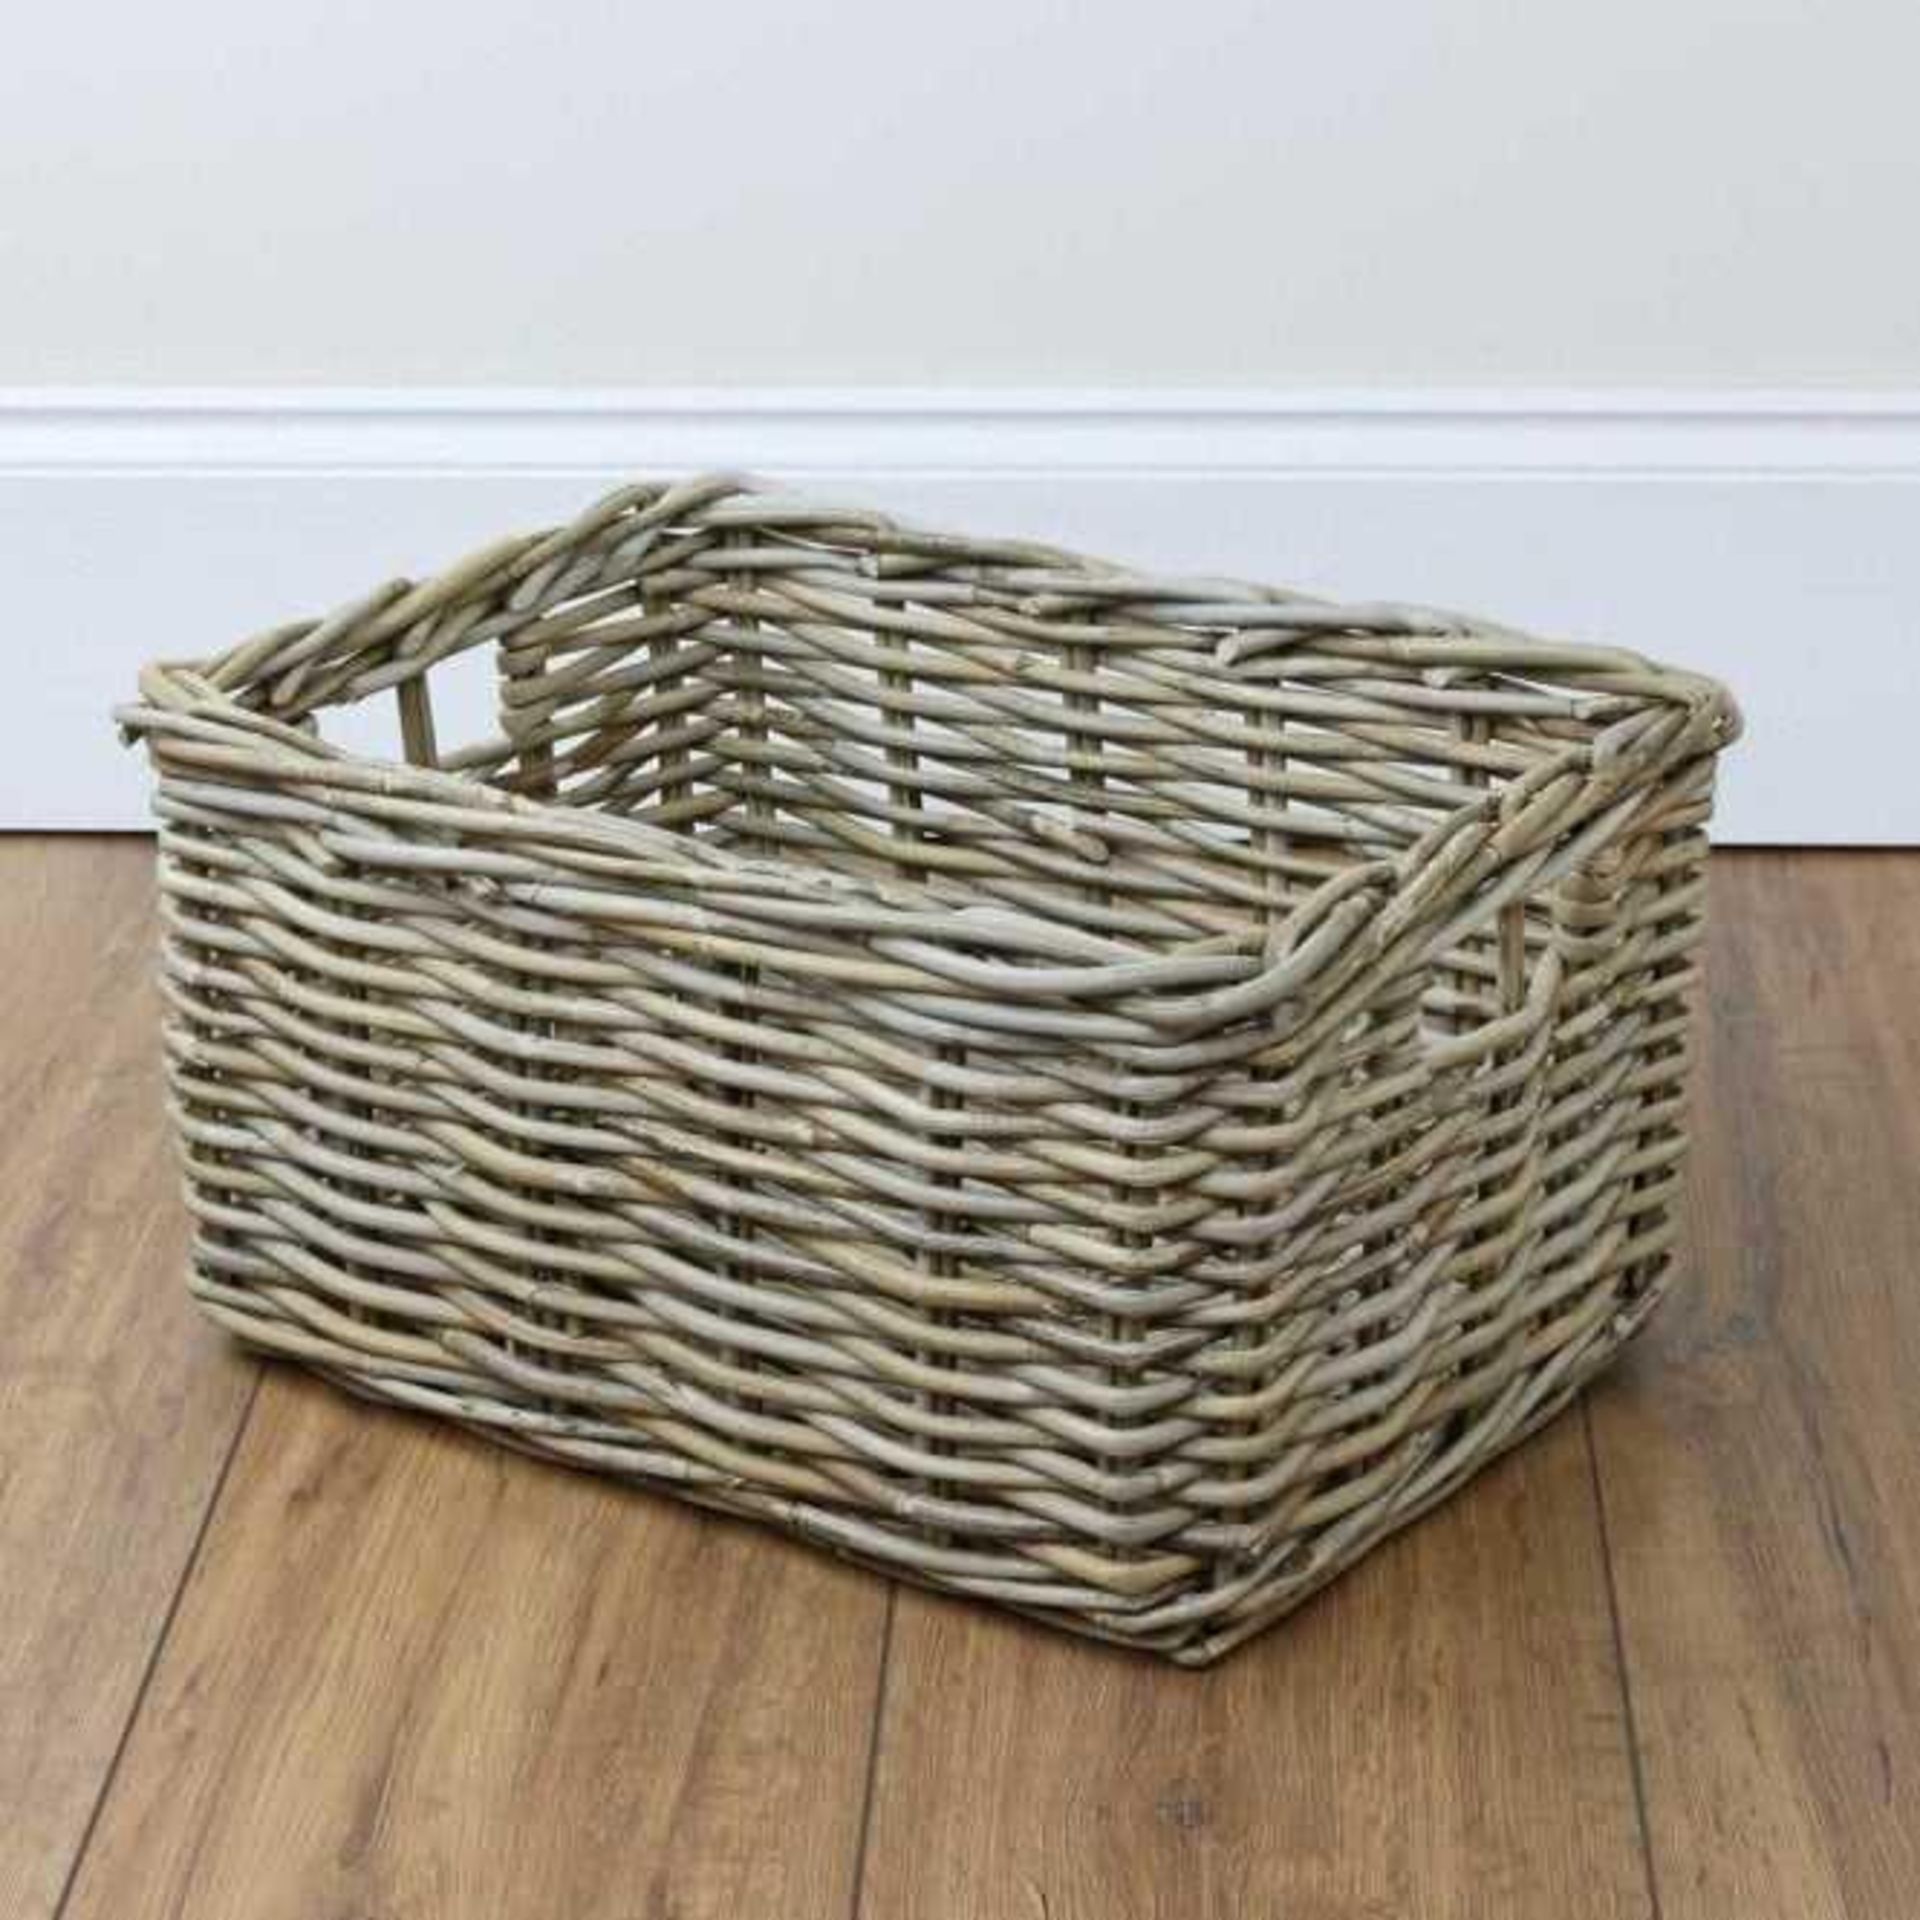 RRP £150 Lot To Contain X4 Baskets, X2 Seagrass Woven Baskets, Woven Rattan Basket, , Woven Seagrass